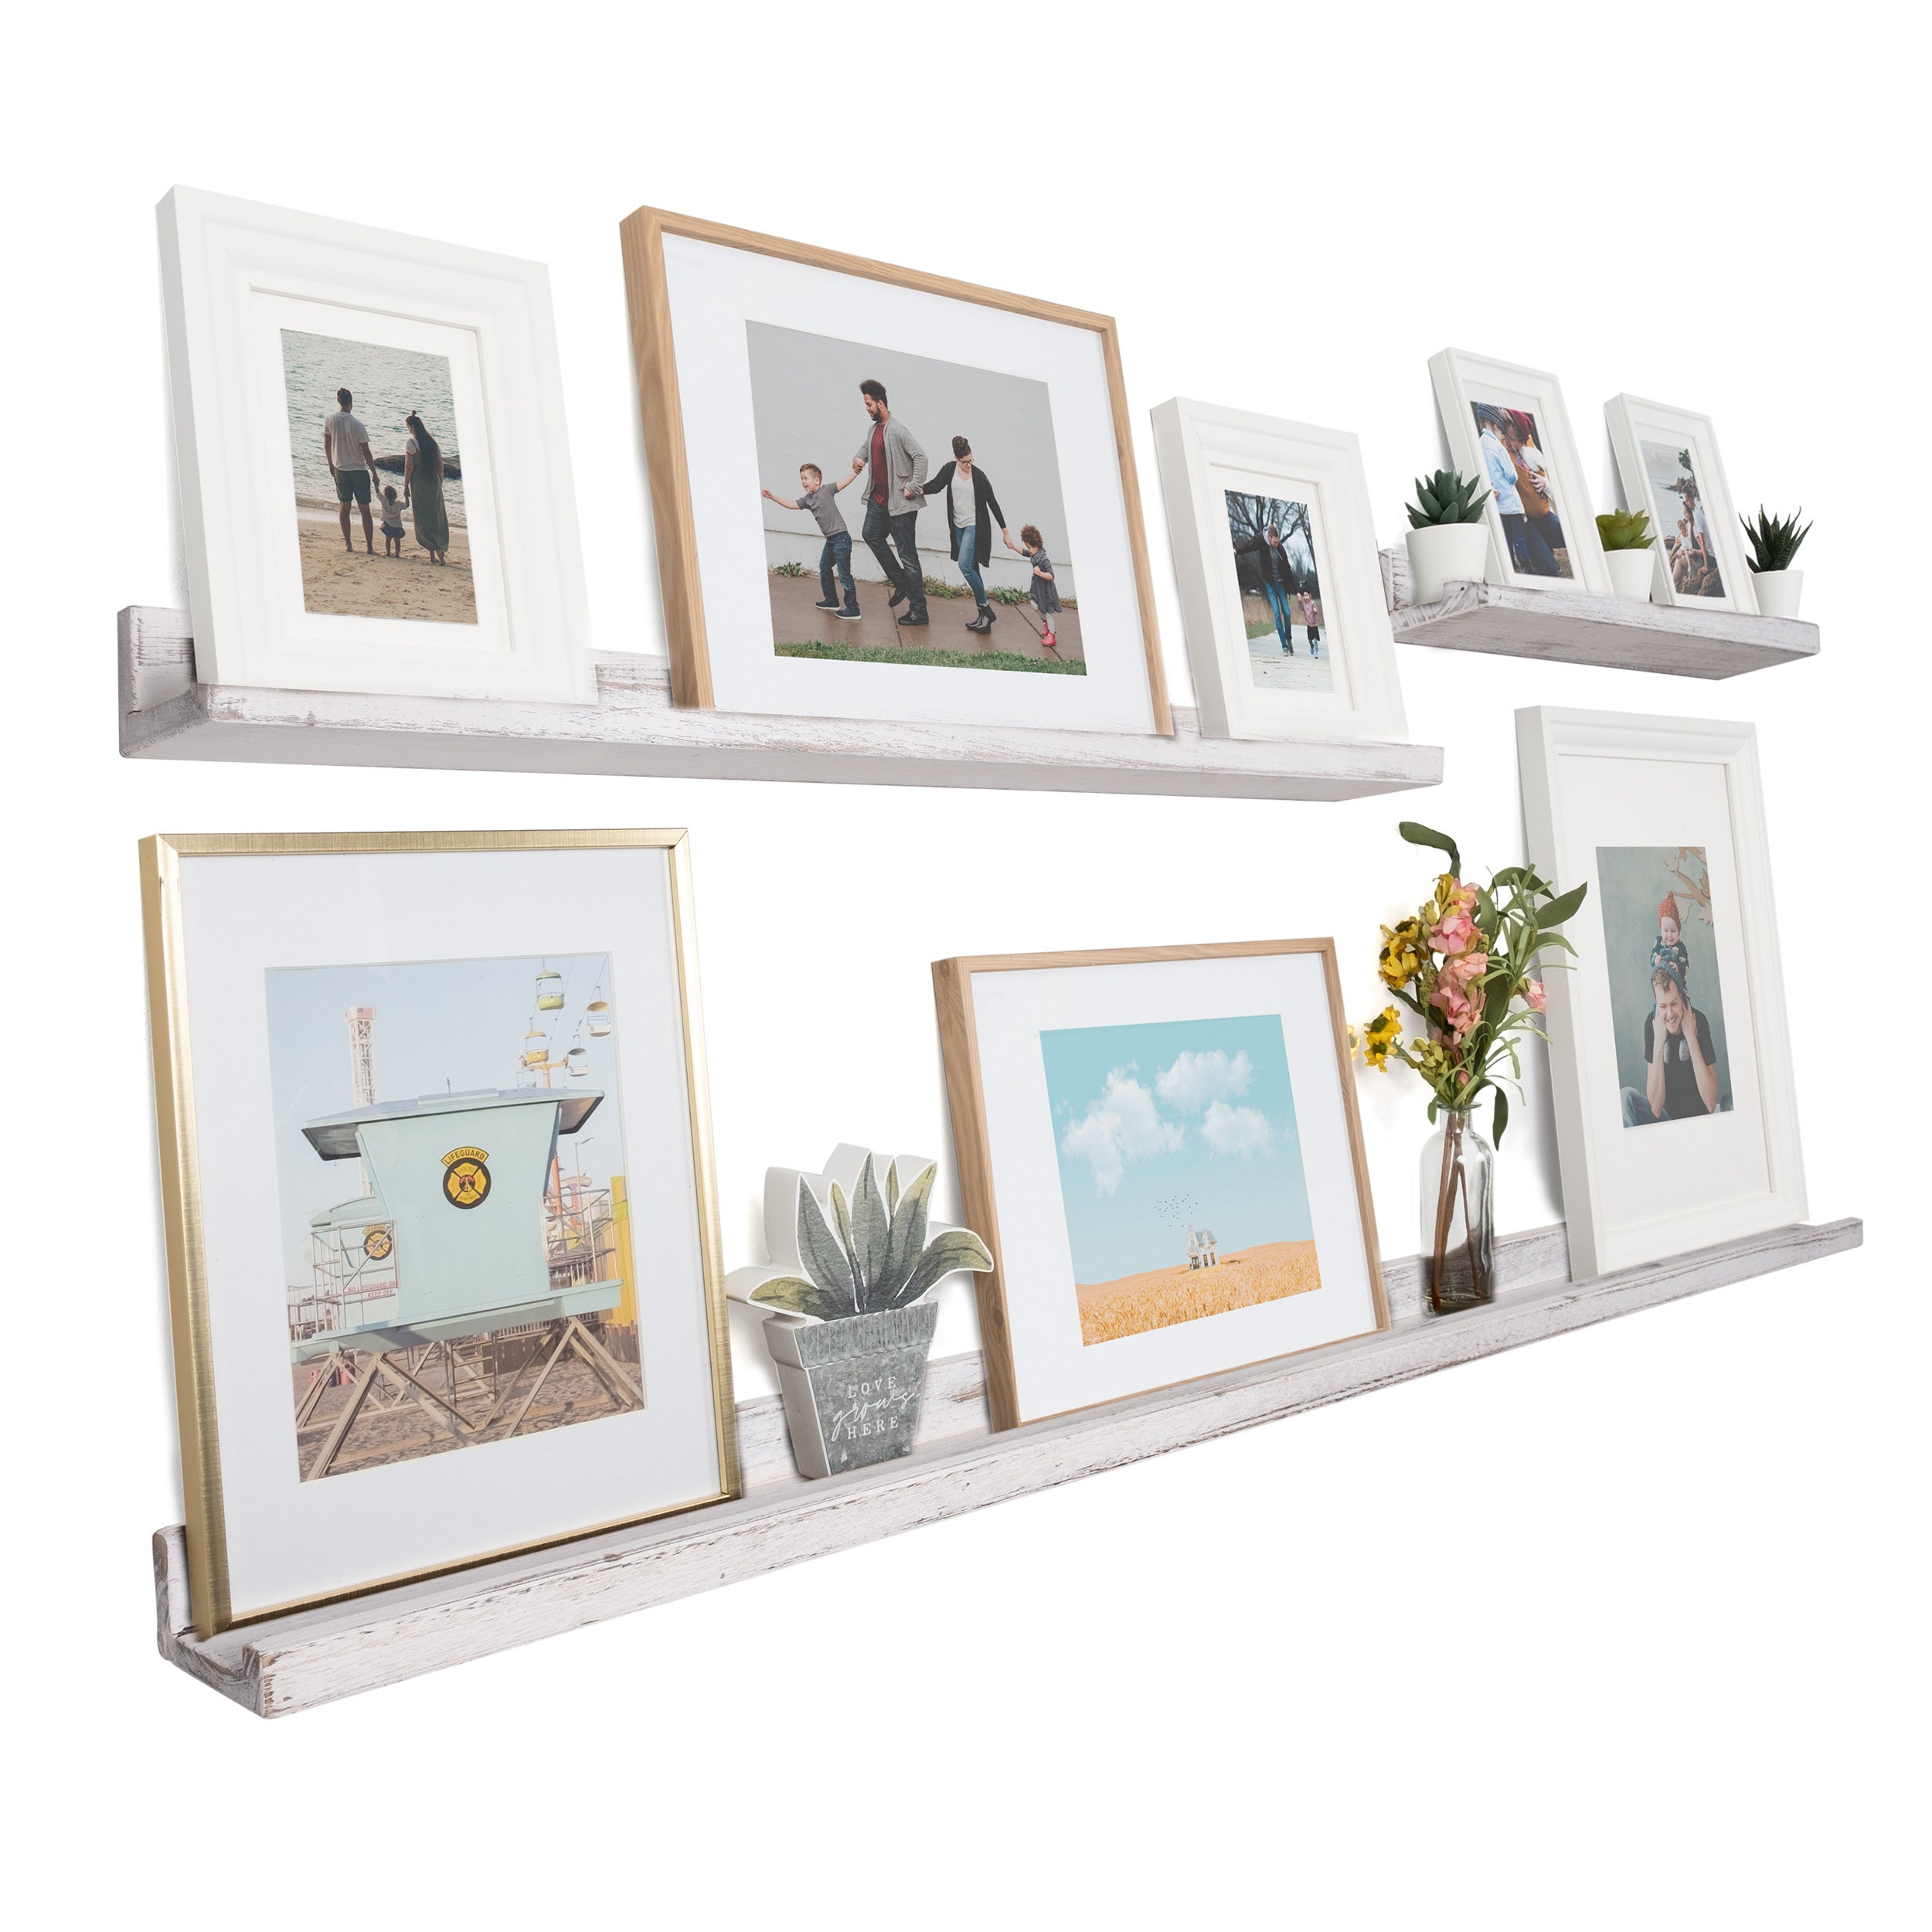 Rustic State Ted Narrow Picture Ledge Shelf Display Set of 6 - Etsy